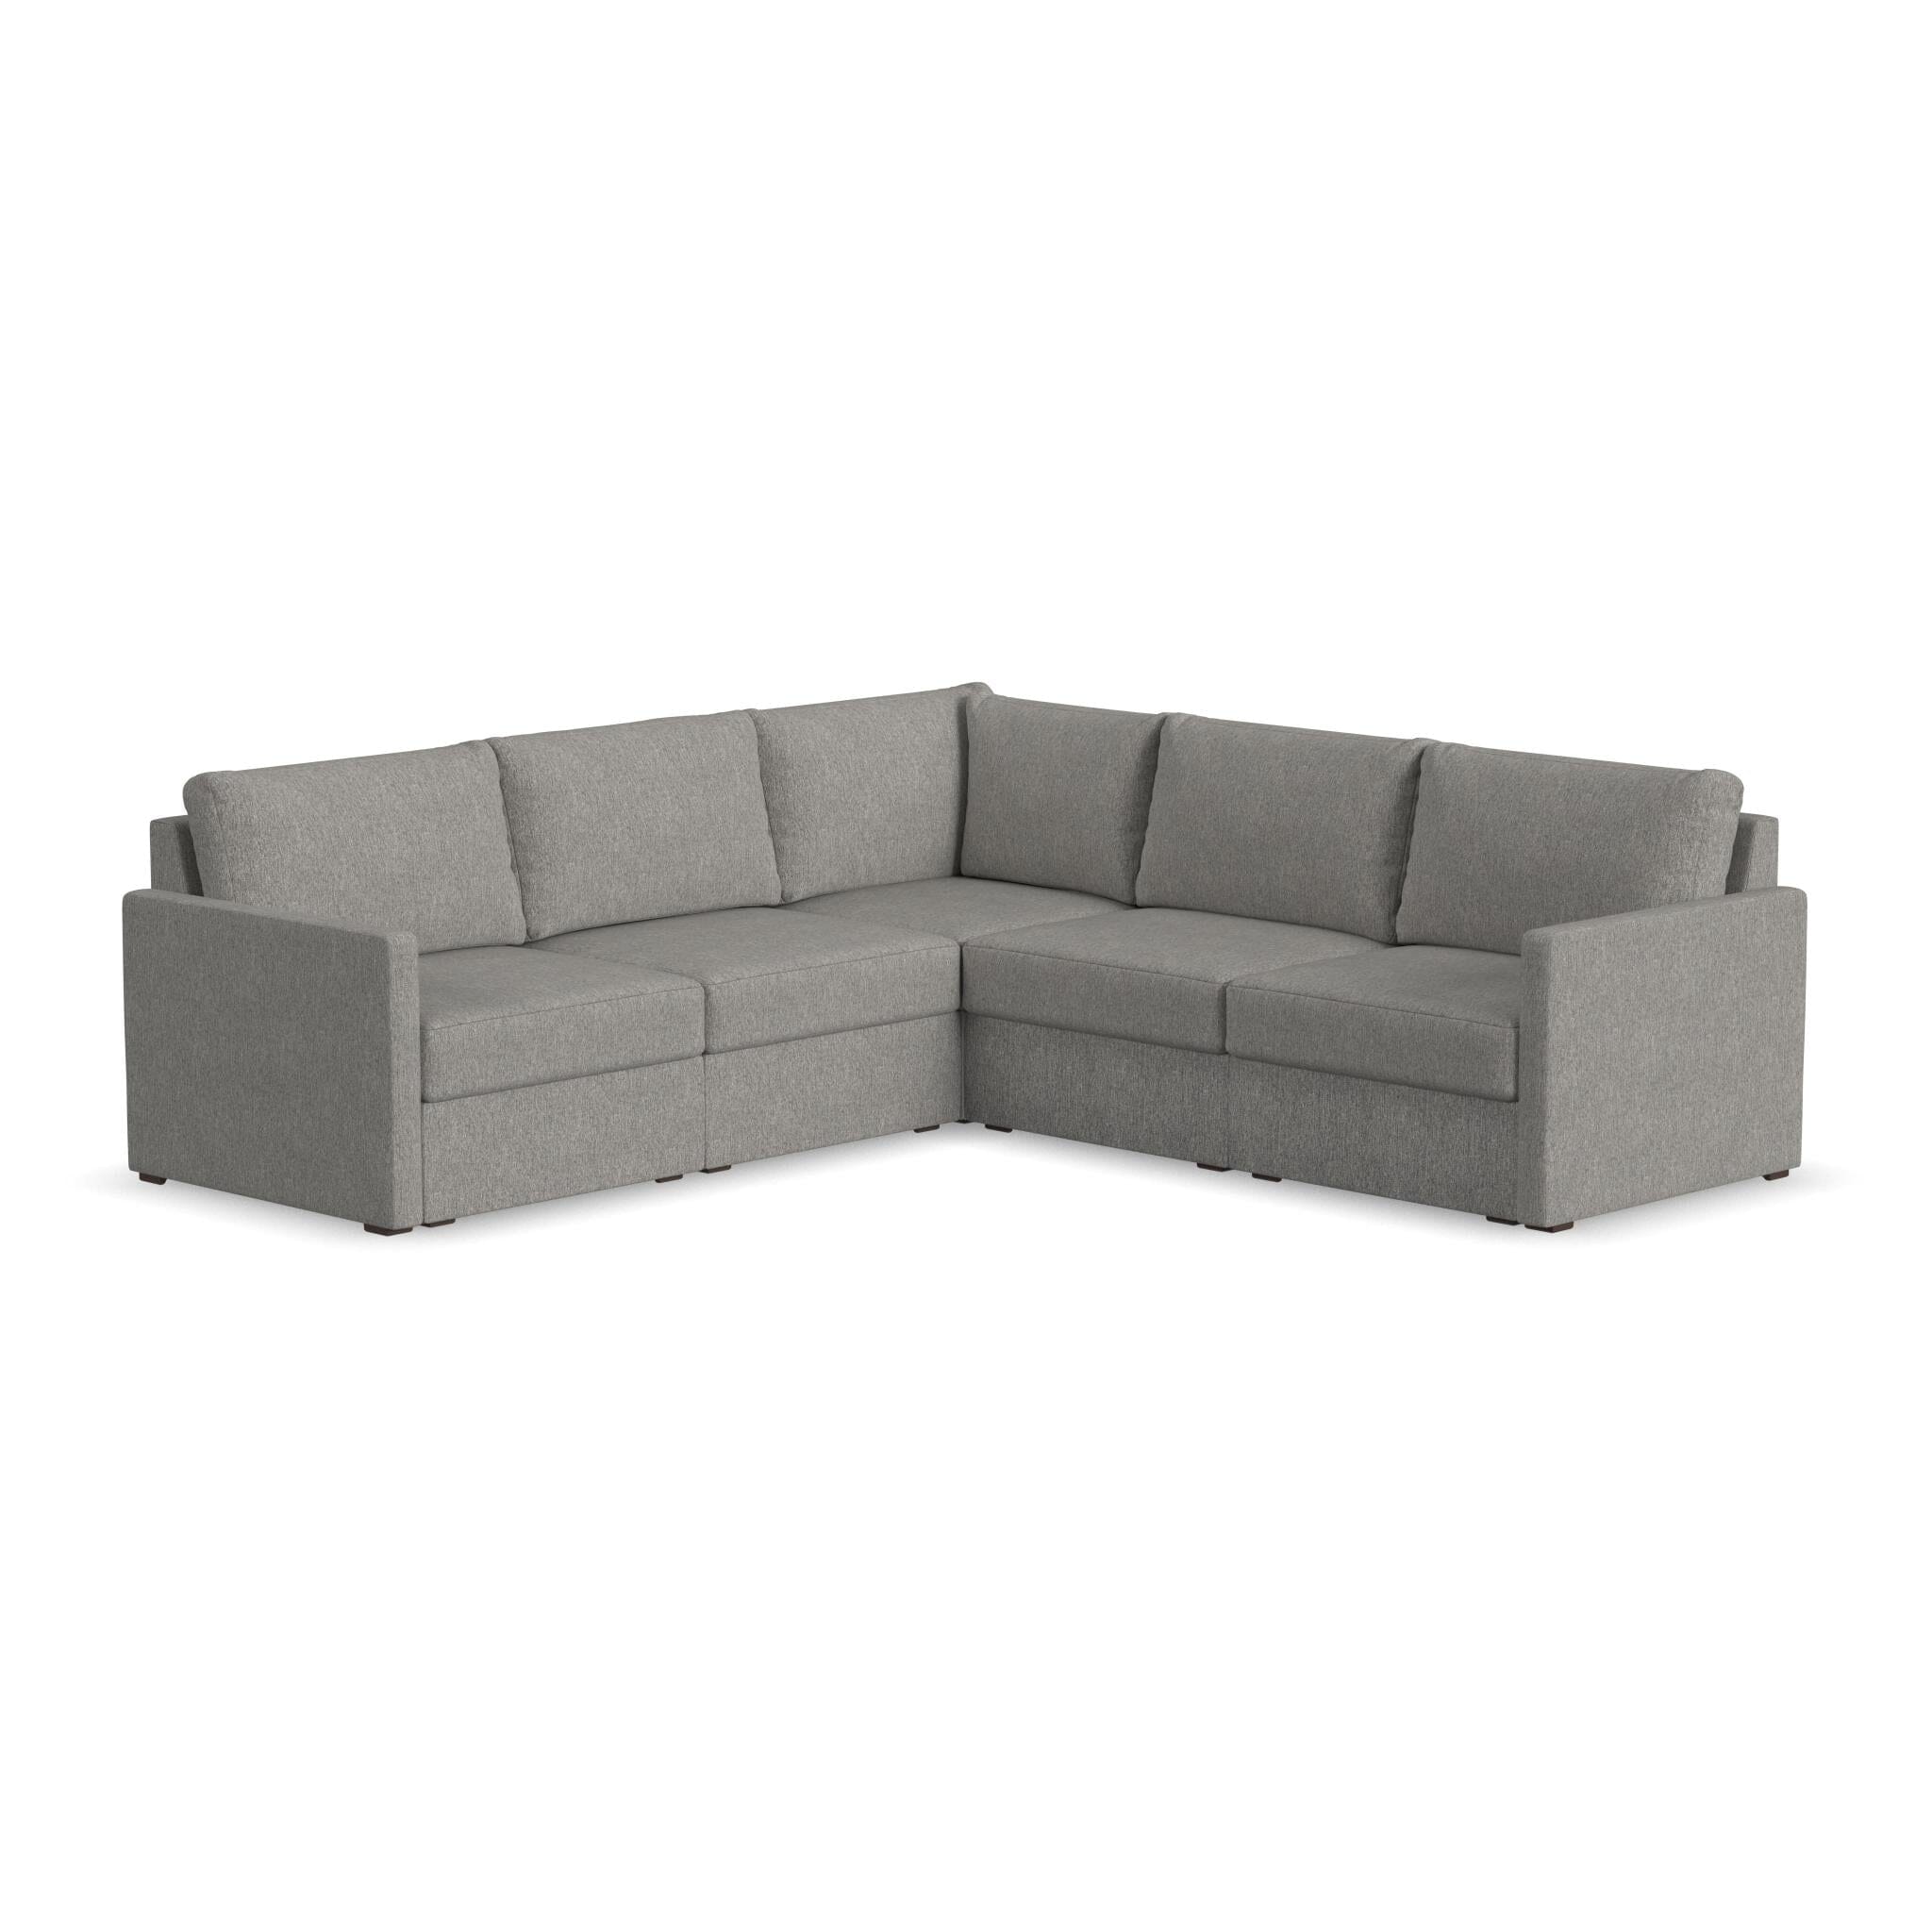 Traditional 5-Seat Sectional with Narrow Arm By Flex Sectional Flex